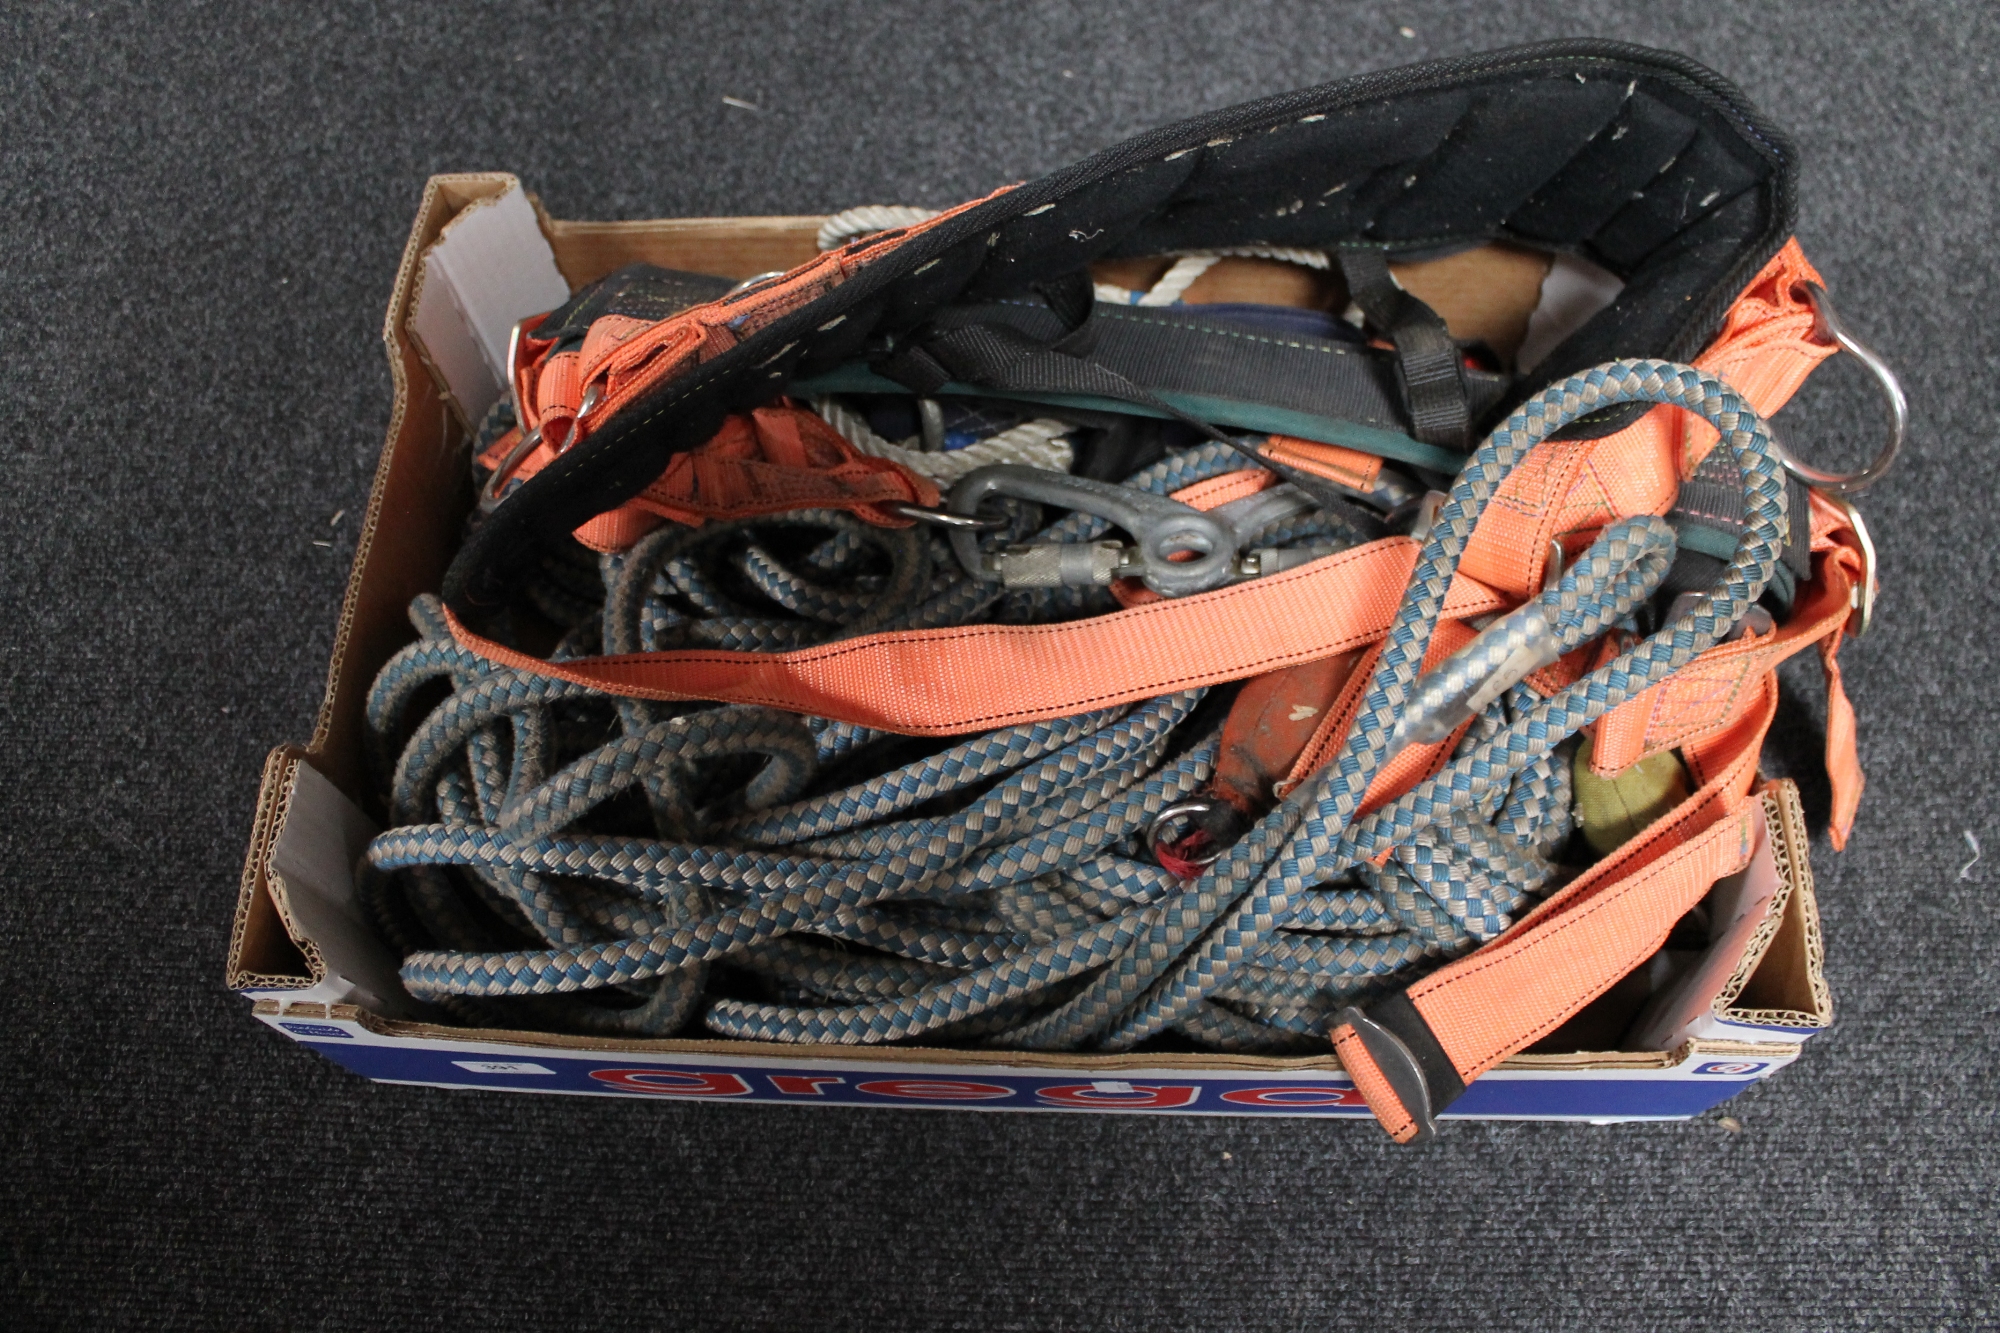 A box of tree surgeon ropes and harnesses